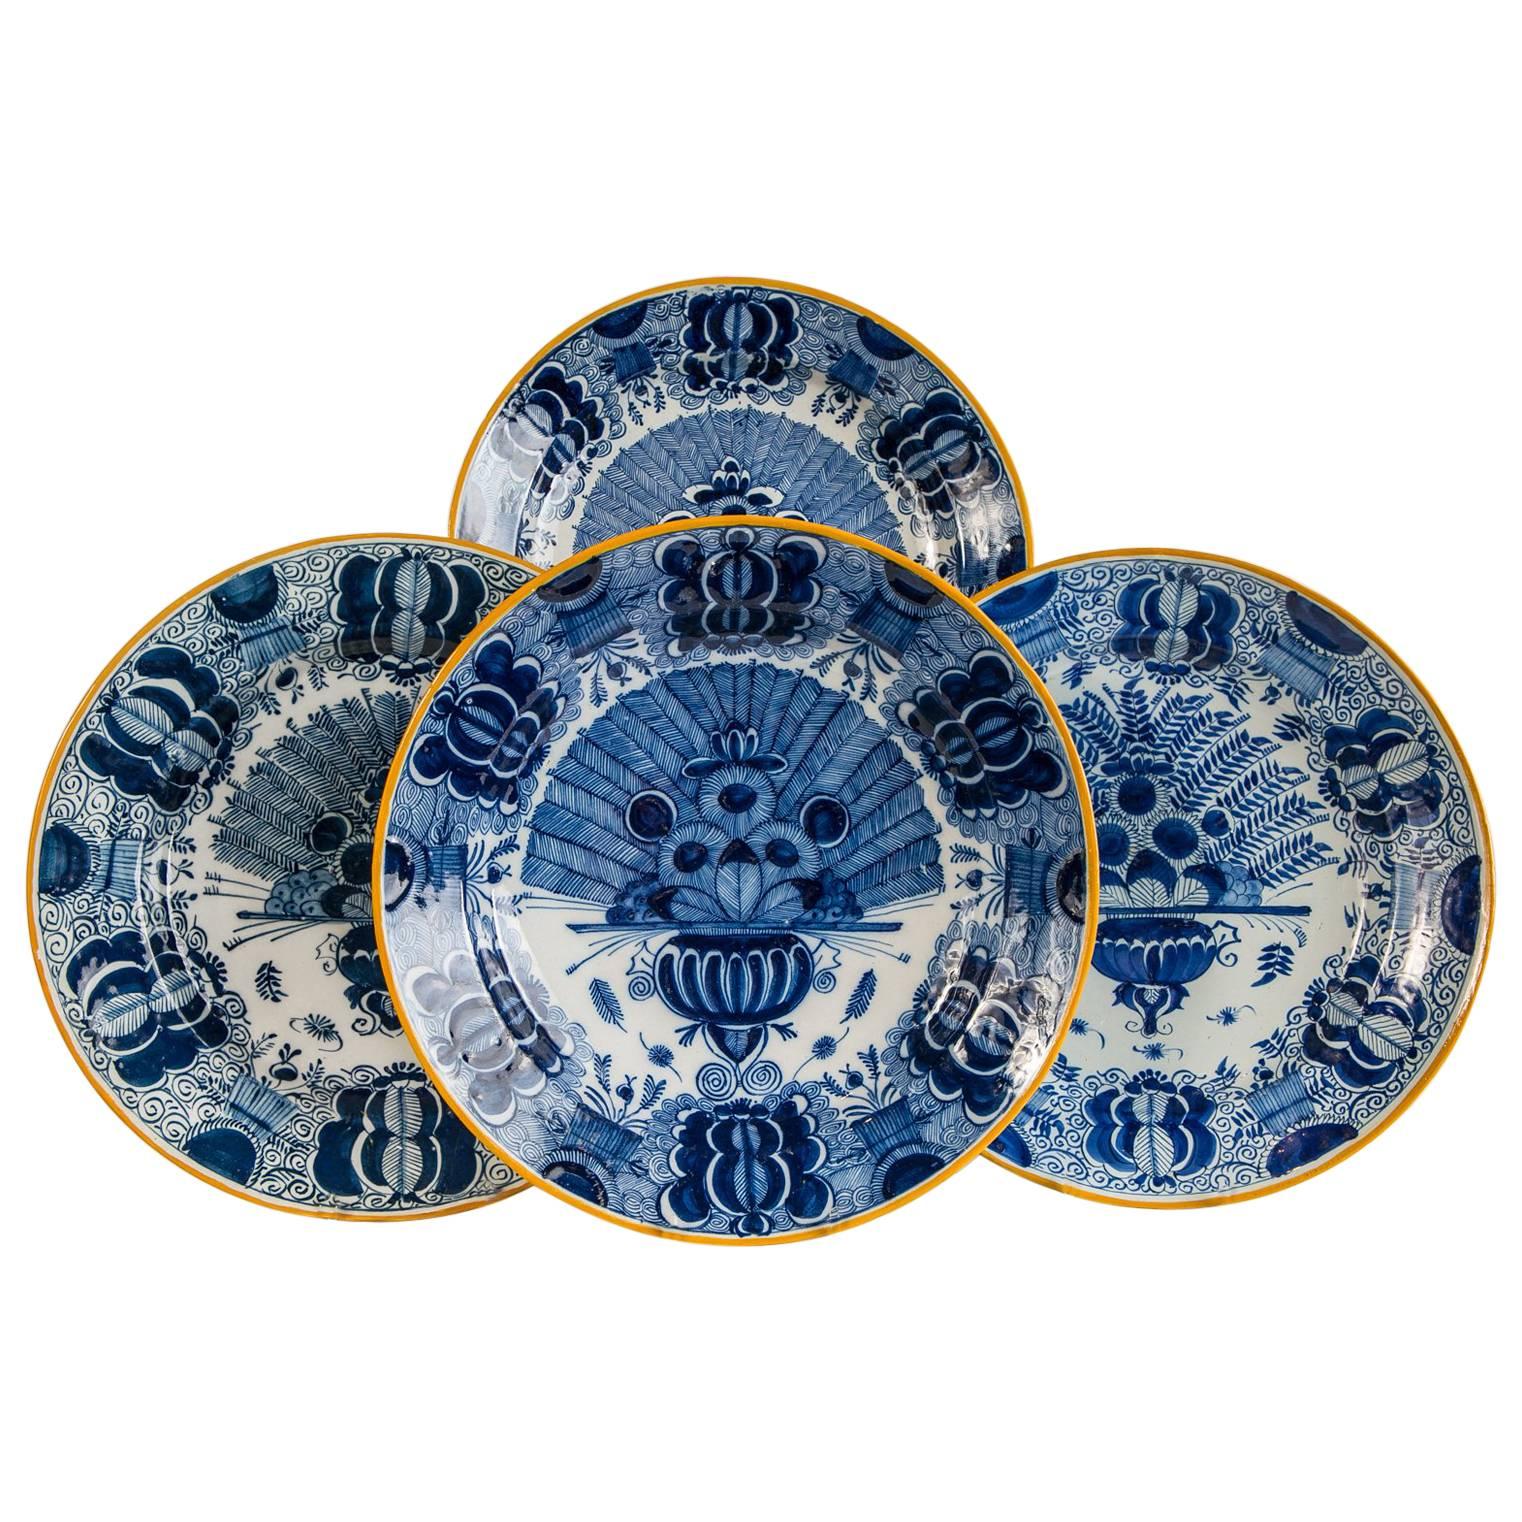 Delft Blue and White Chargers a Group of a Dozen Made in the Last Quarter 18th C